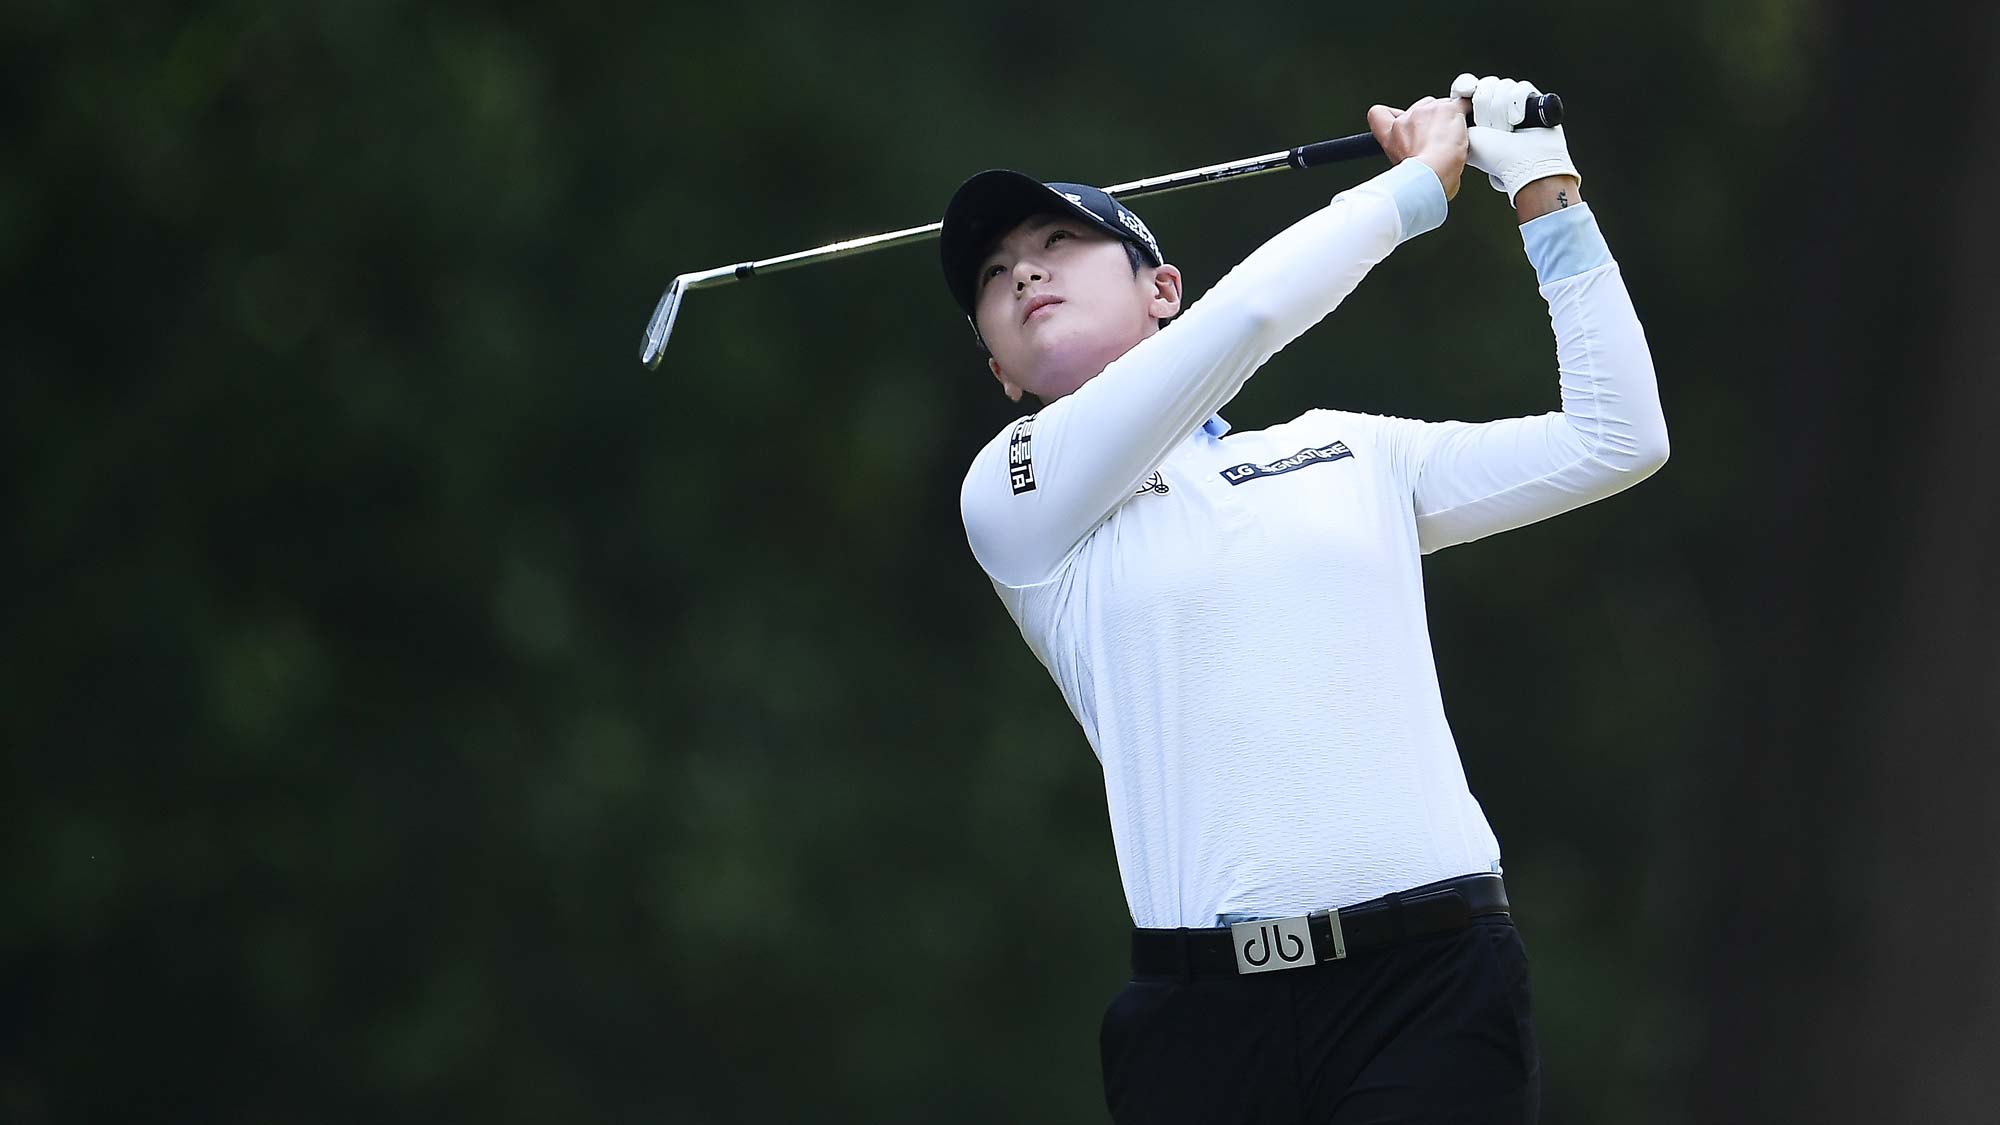 Sung Hyun Park of the Republic of Korea hits her tee shot on the second hole during the third round of the Thornberry Creek LPGA Classic